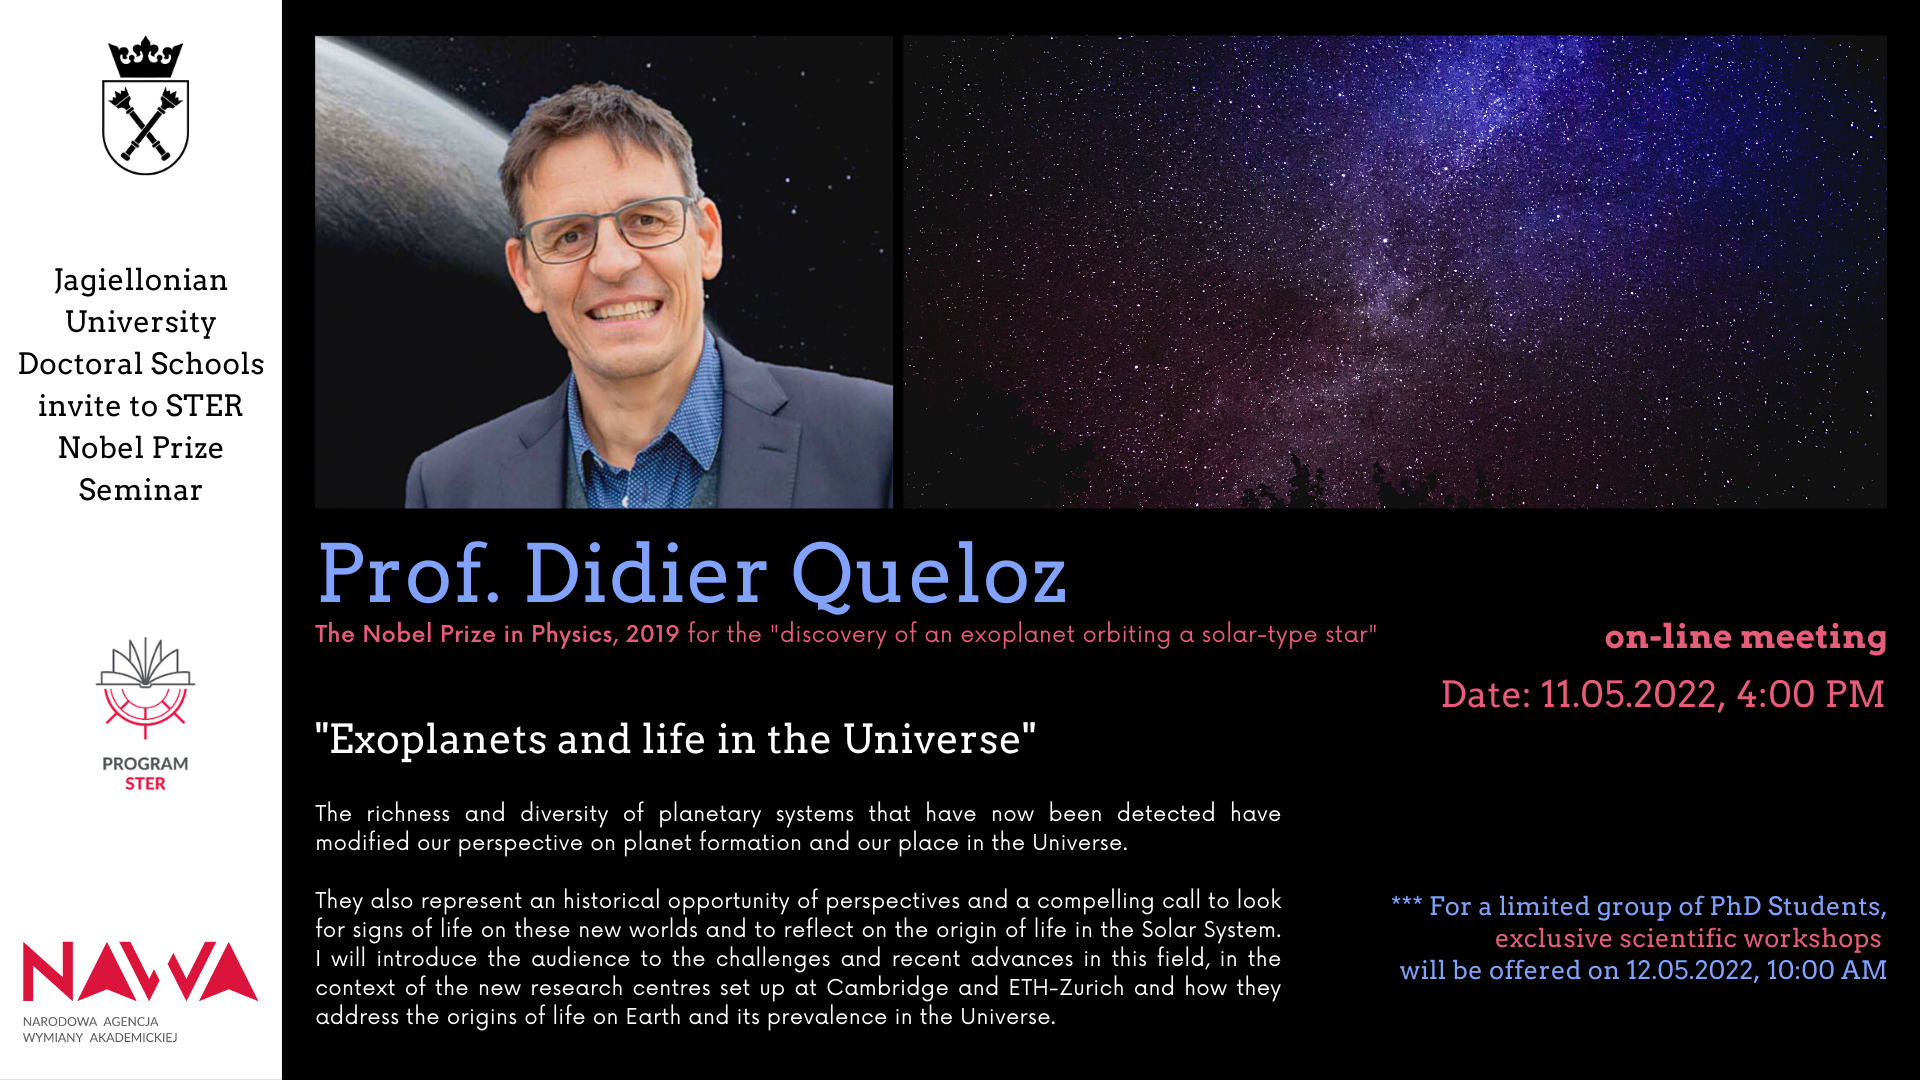 11.05.2022, 4:00 PM (!): Nobel Laureate Seminar: Didier Queloz (University of Cambridge): Exoplanets and life in the Universe